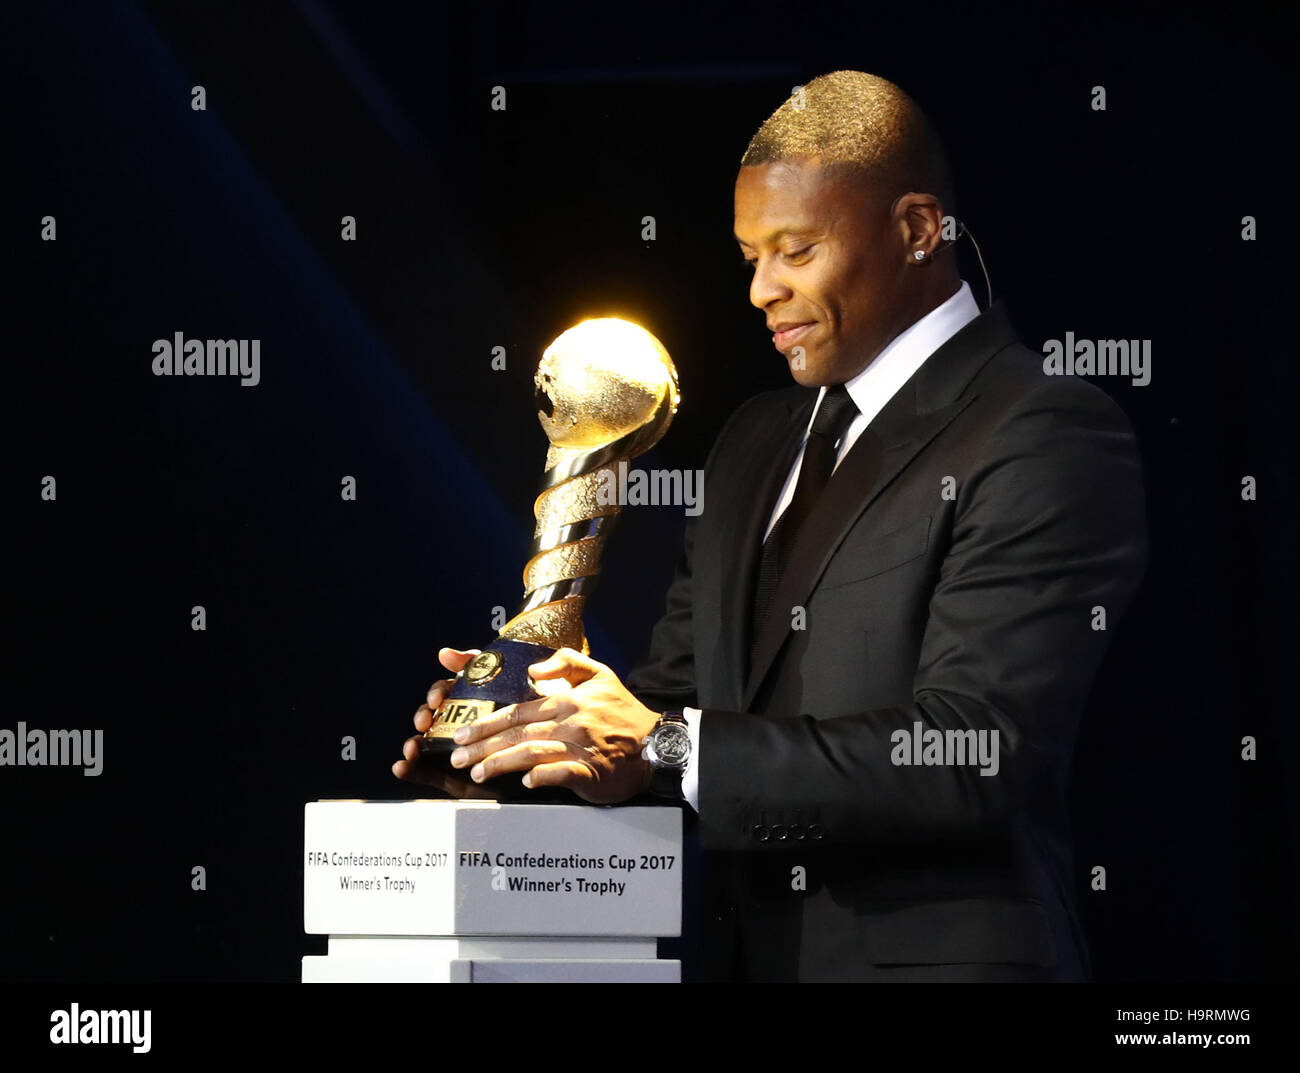 Kazan, Russia. 26th Nov, 2016. Brazilian footballer Julio Baptista with the Confederations trophy at the group draw of the Confederations Cup 2017 at the tennis academy in Kazan, Russia, 26 November 2016. The 8-nation tournament will be held in Russia from 17 June - 2 July 2017. Photo: Christian Charisius/dpa/Alamy Live News Stock Photo